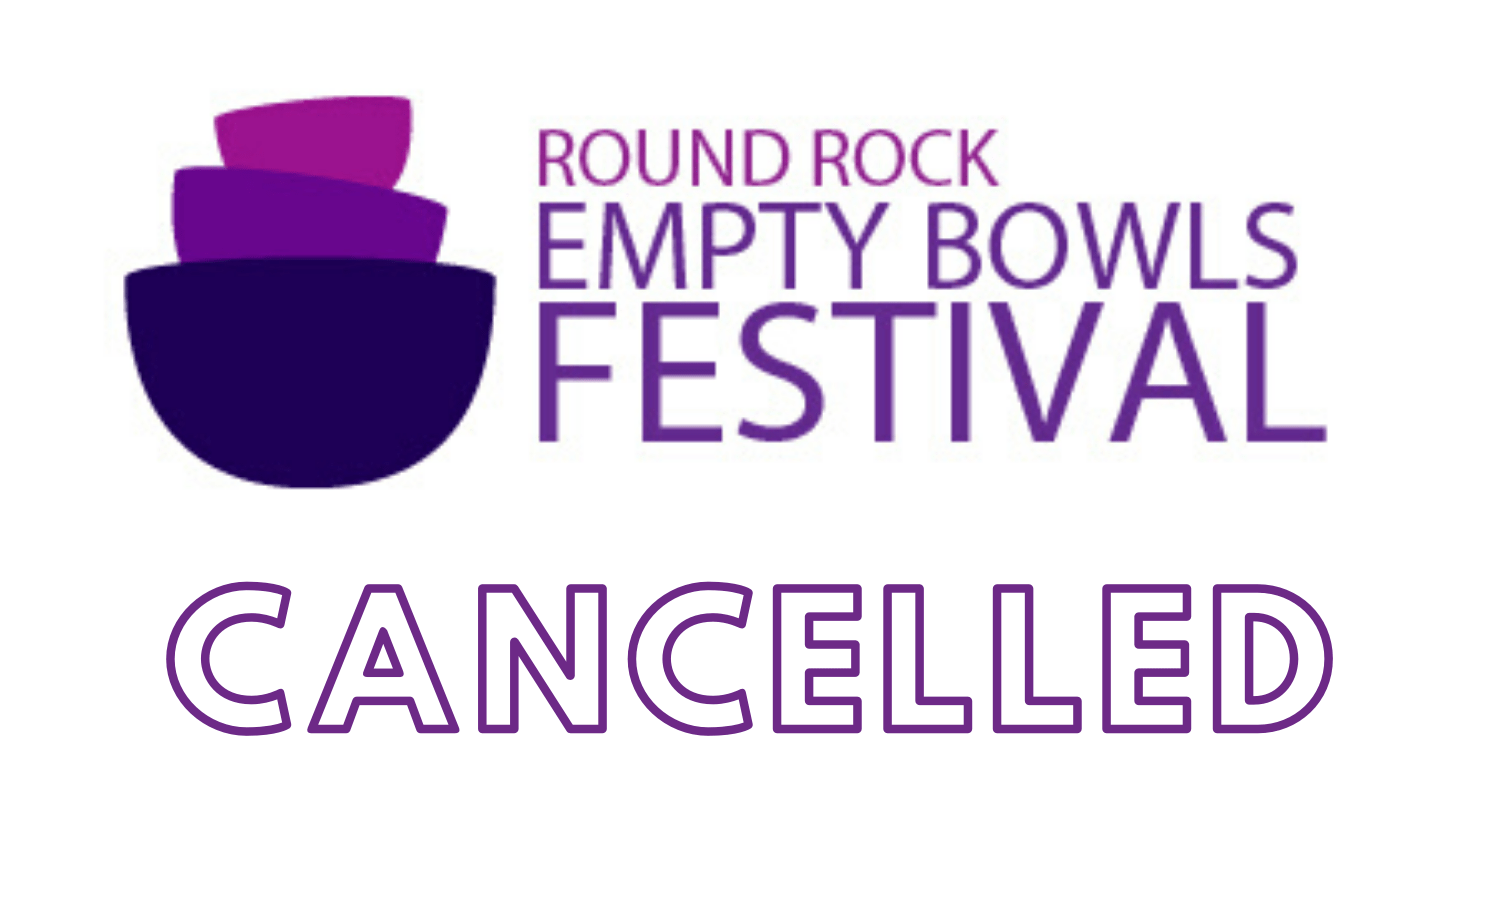 Round Rock Empty Bowls Festival 2020 CANCELLED